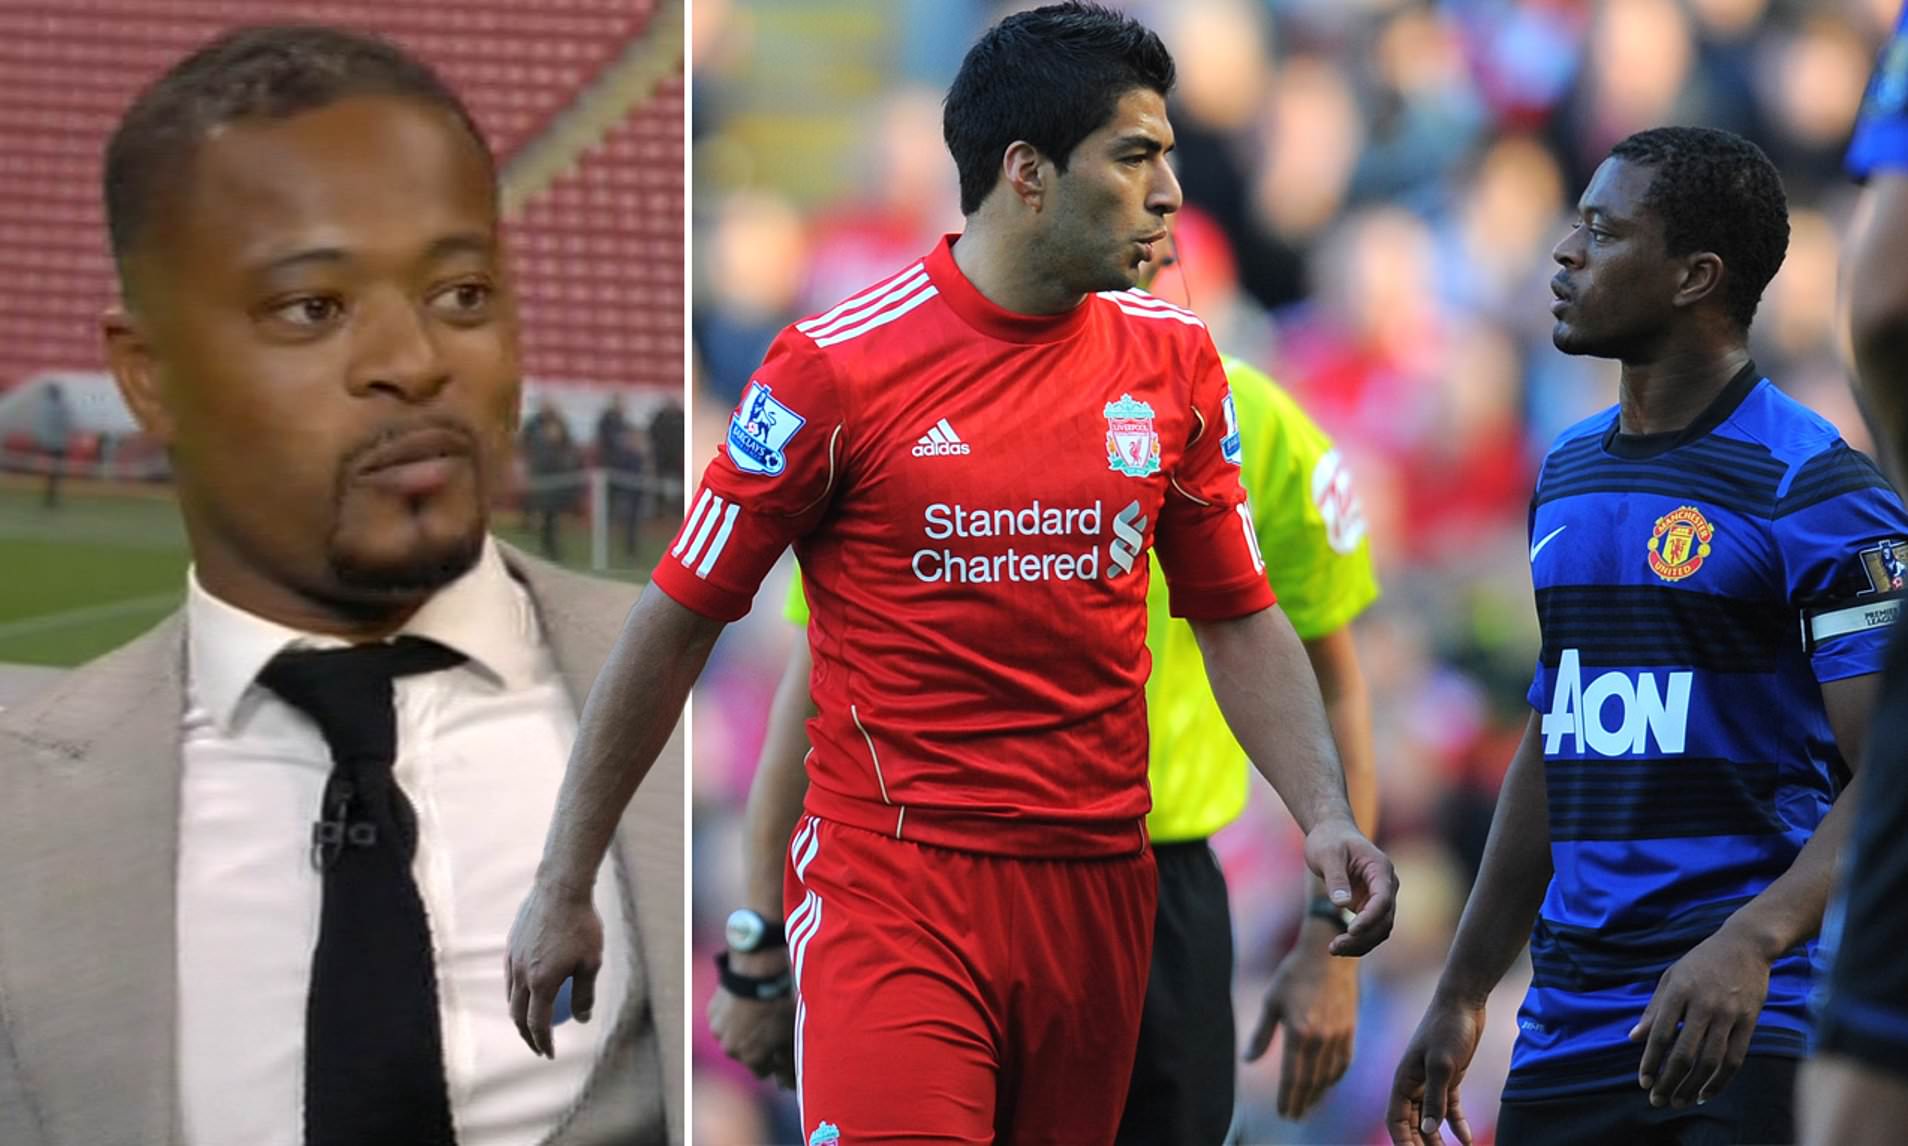 Liverpool finally apologise to Evra after Suarez racism fallout